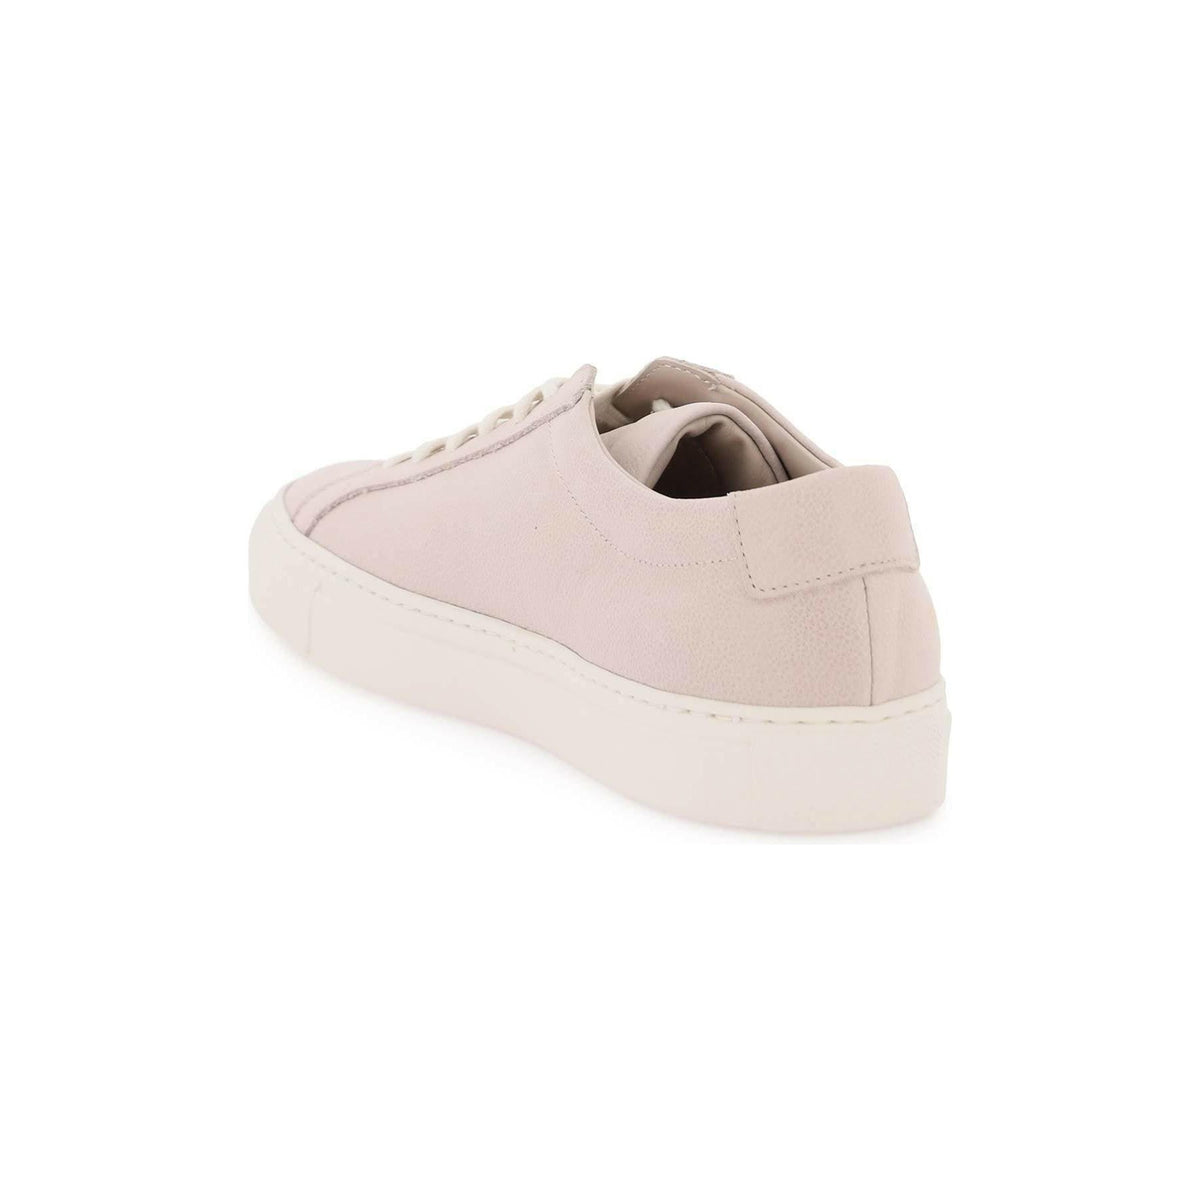 Nude Original Achilles Low-Top Leather Sneakers COMMON PROJECTS JOHN JULIA.